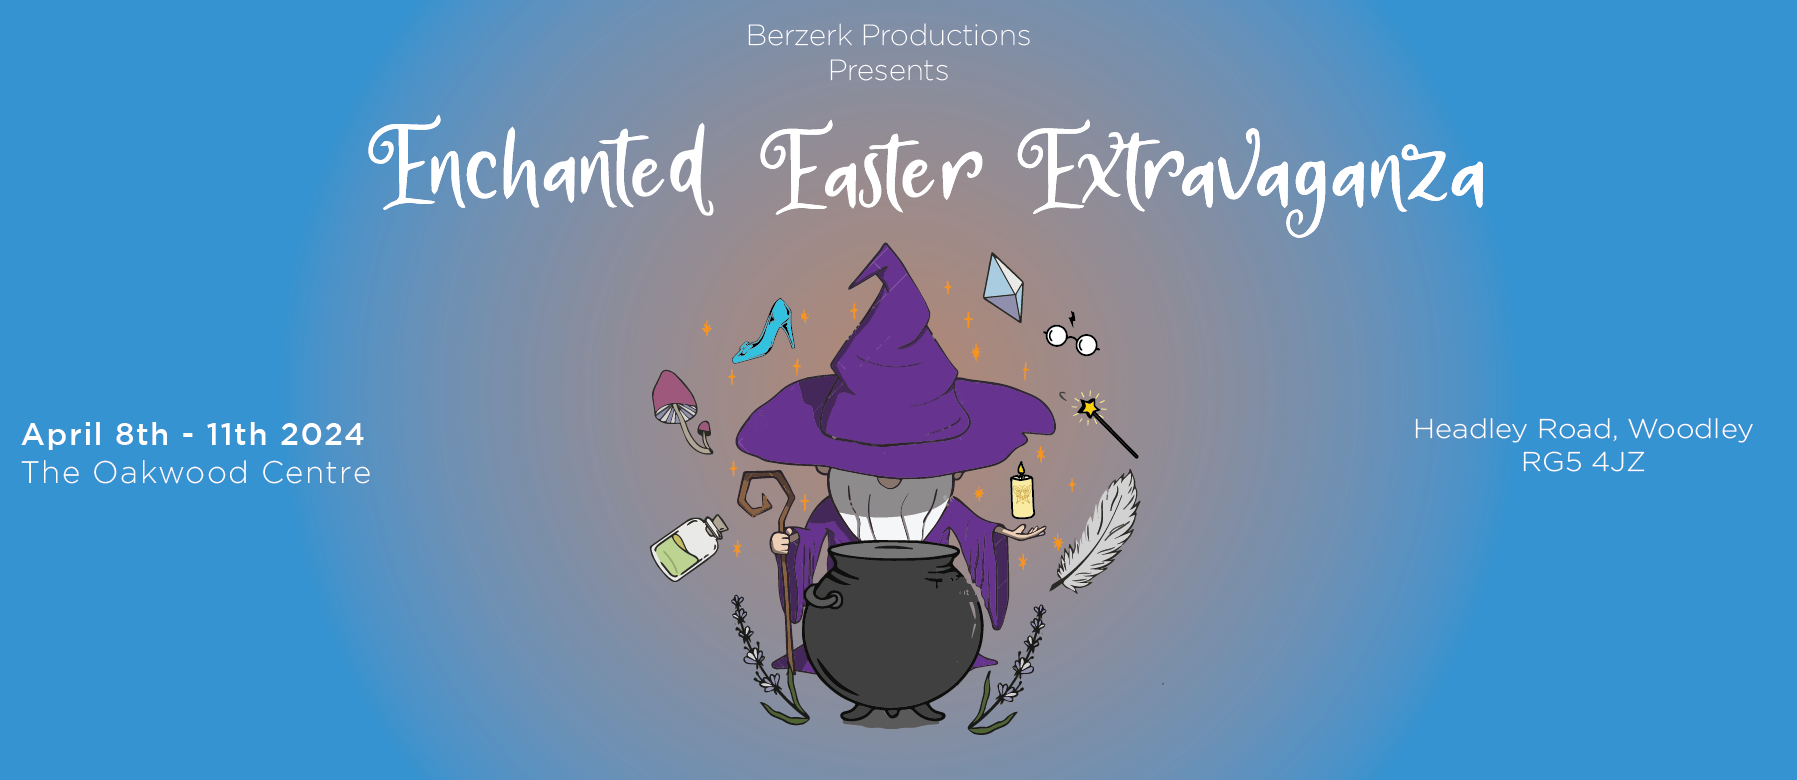 berzerk-productions-enchanted-easter-extravaganza-web-banner